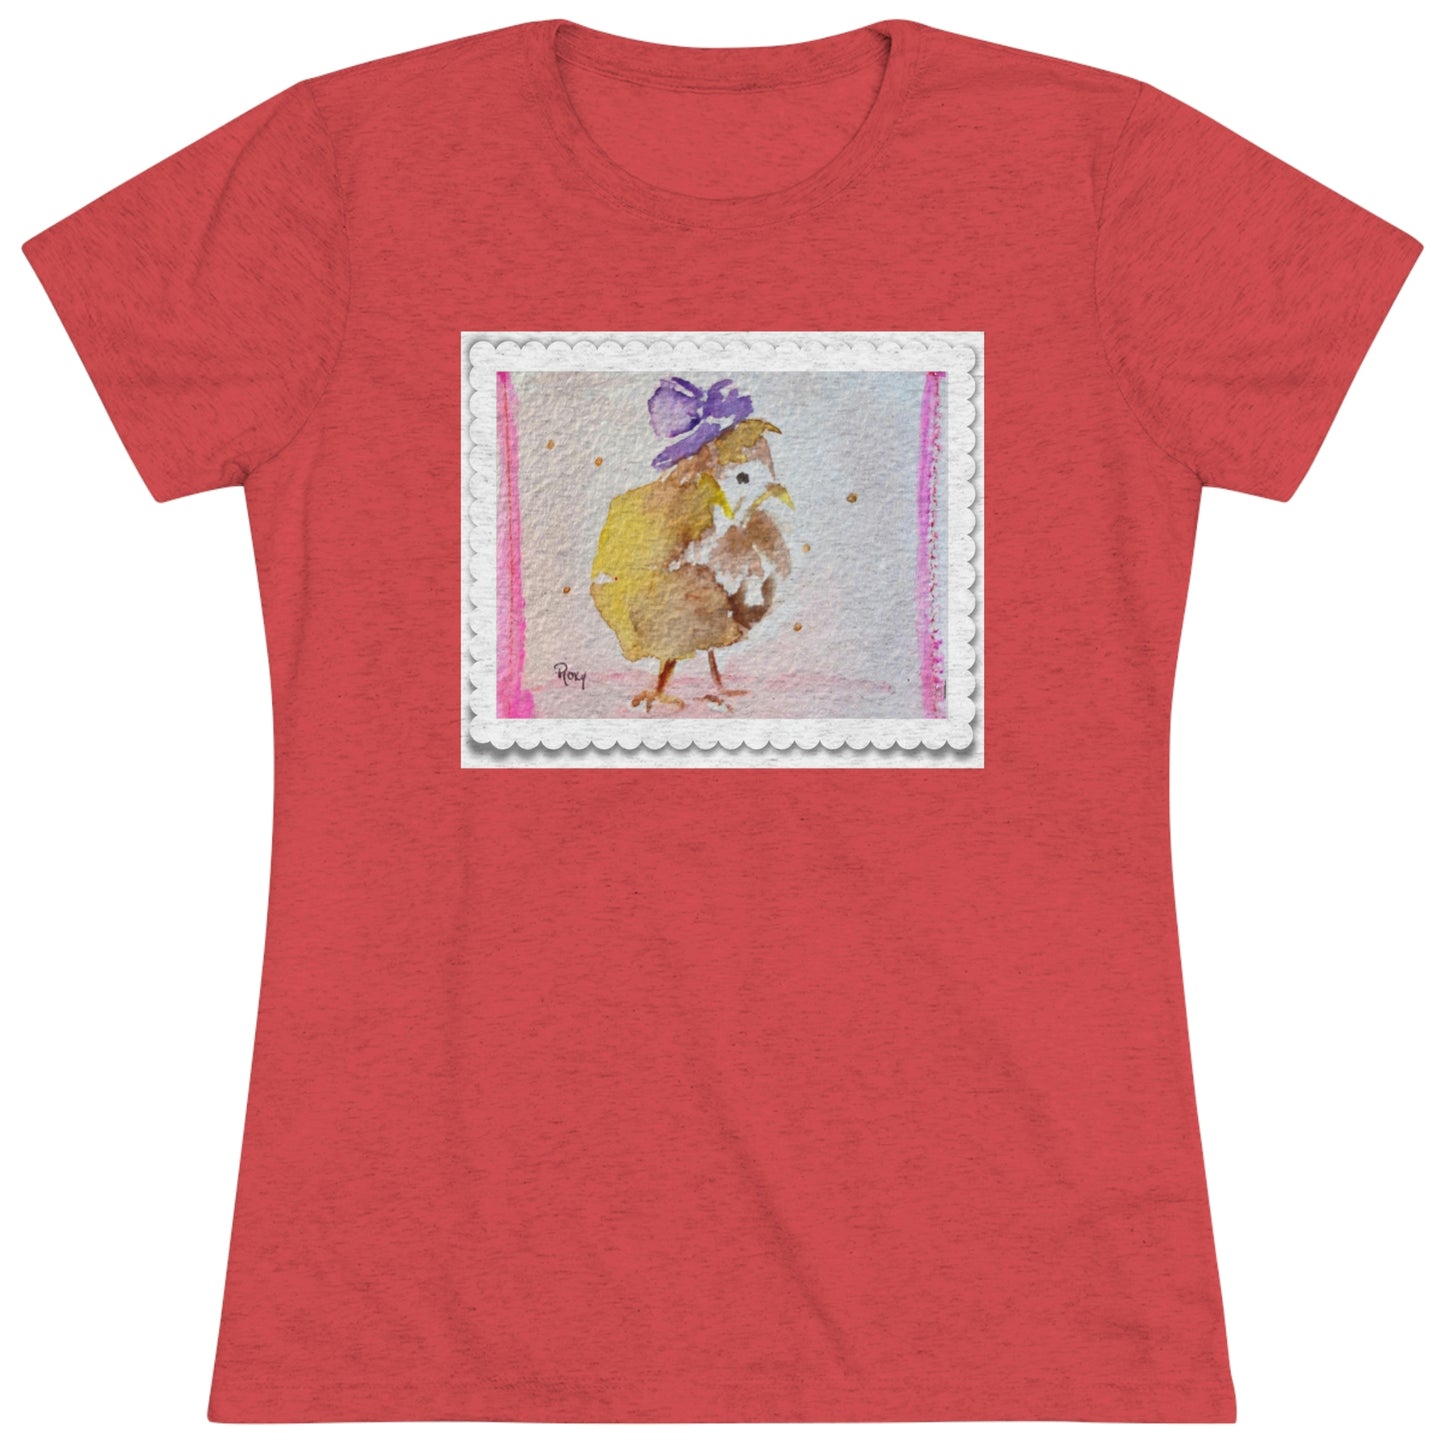 Fascinating Chick Women's fitted Triblend Tee  tee shirt